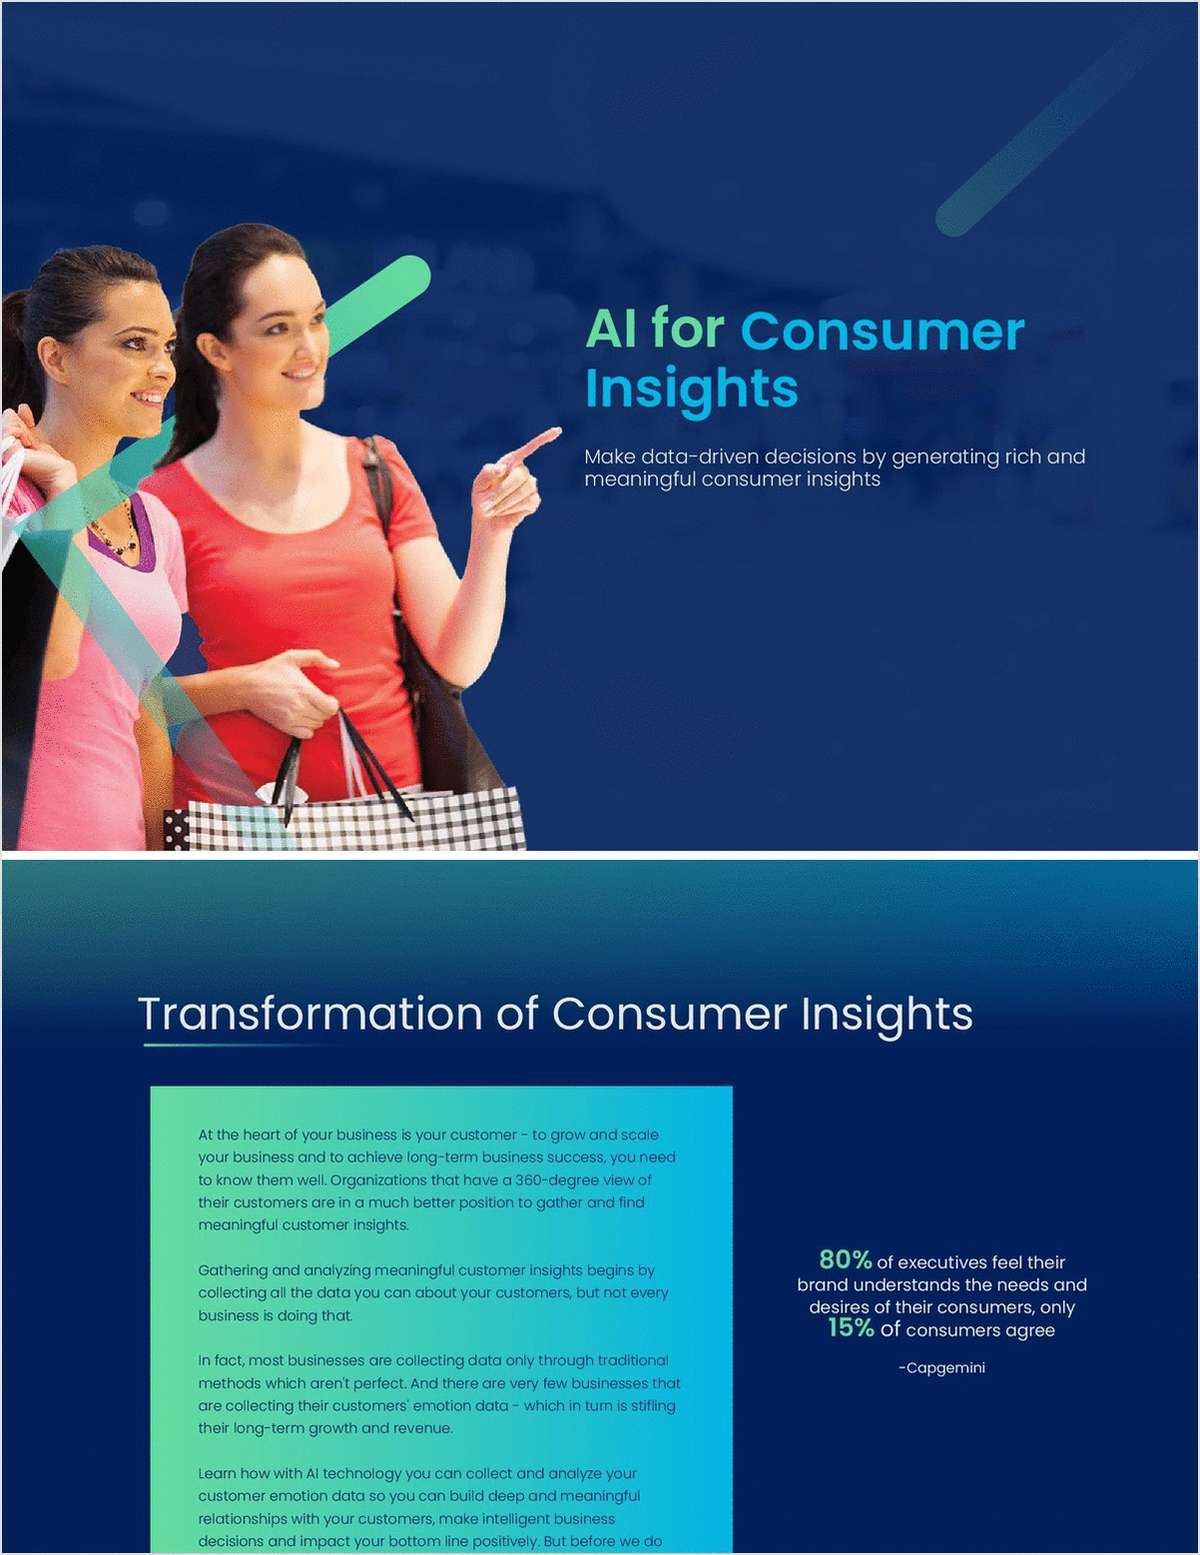 Leveraging AI for Better Consumer Insights and Research